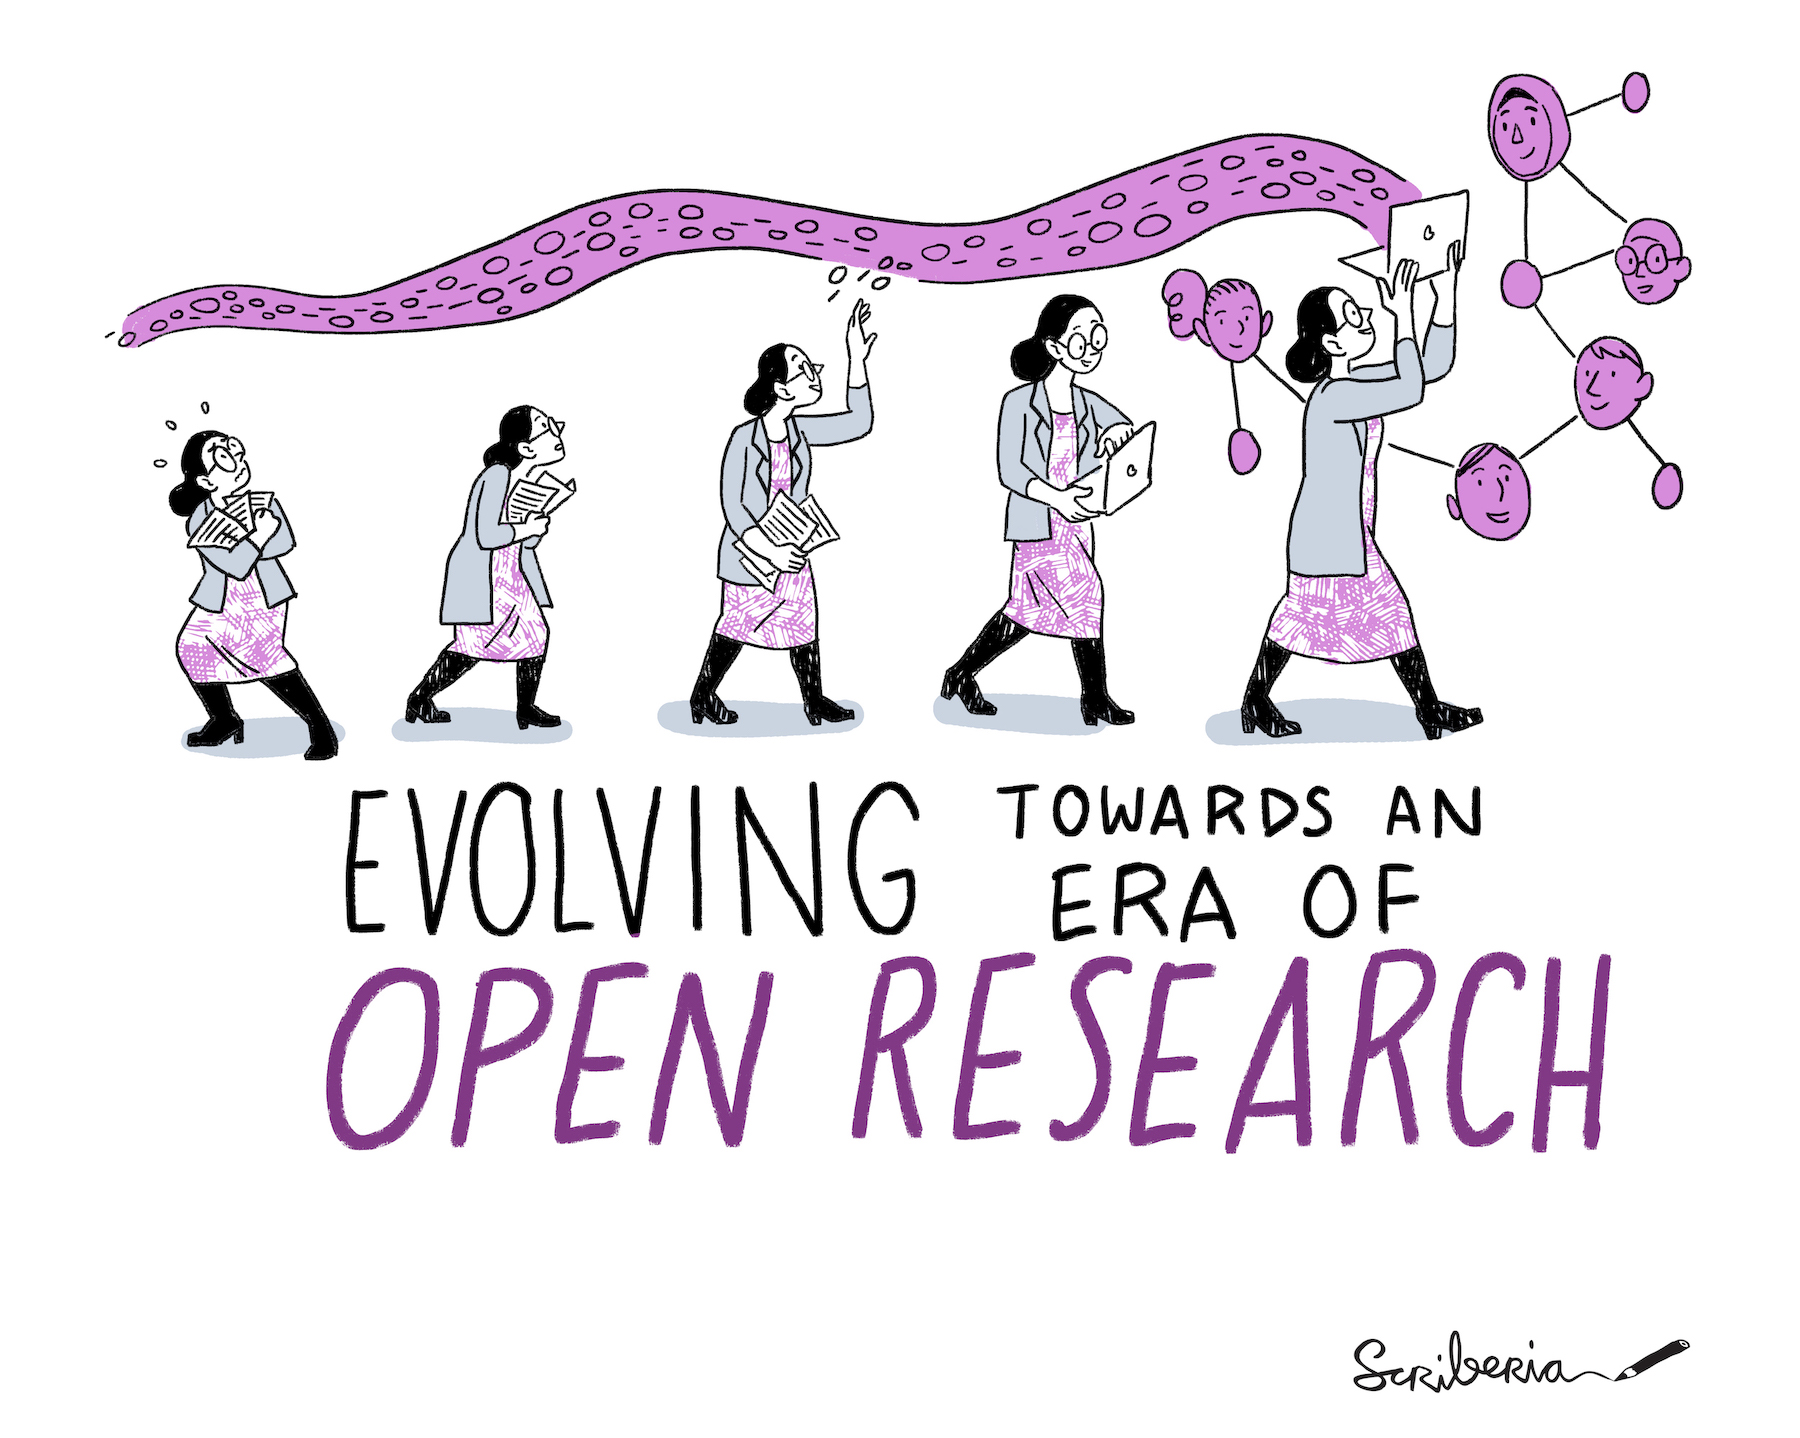 This image shows a researcher evolving their research practices to move towards the era of open research.